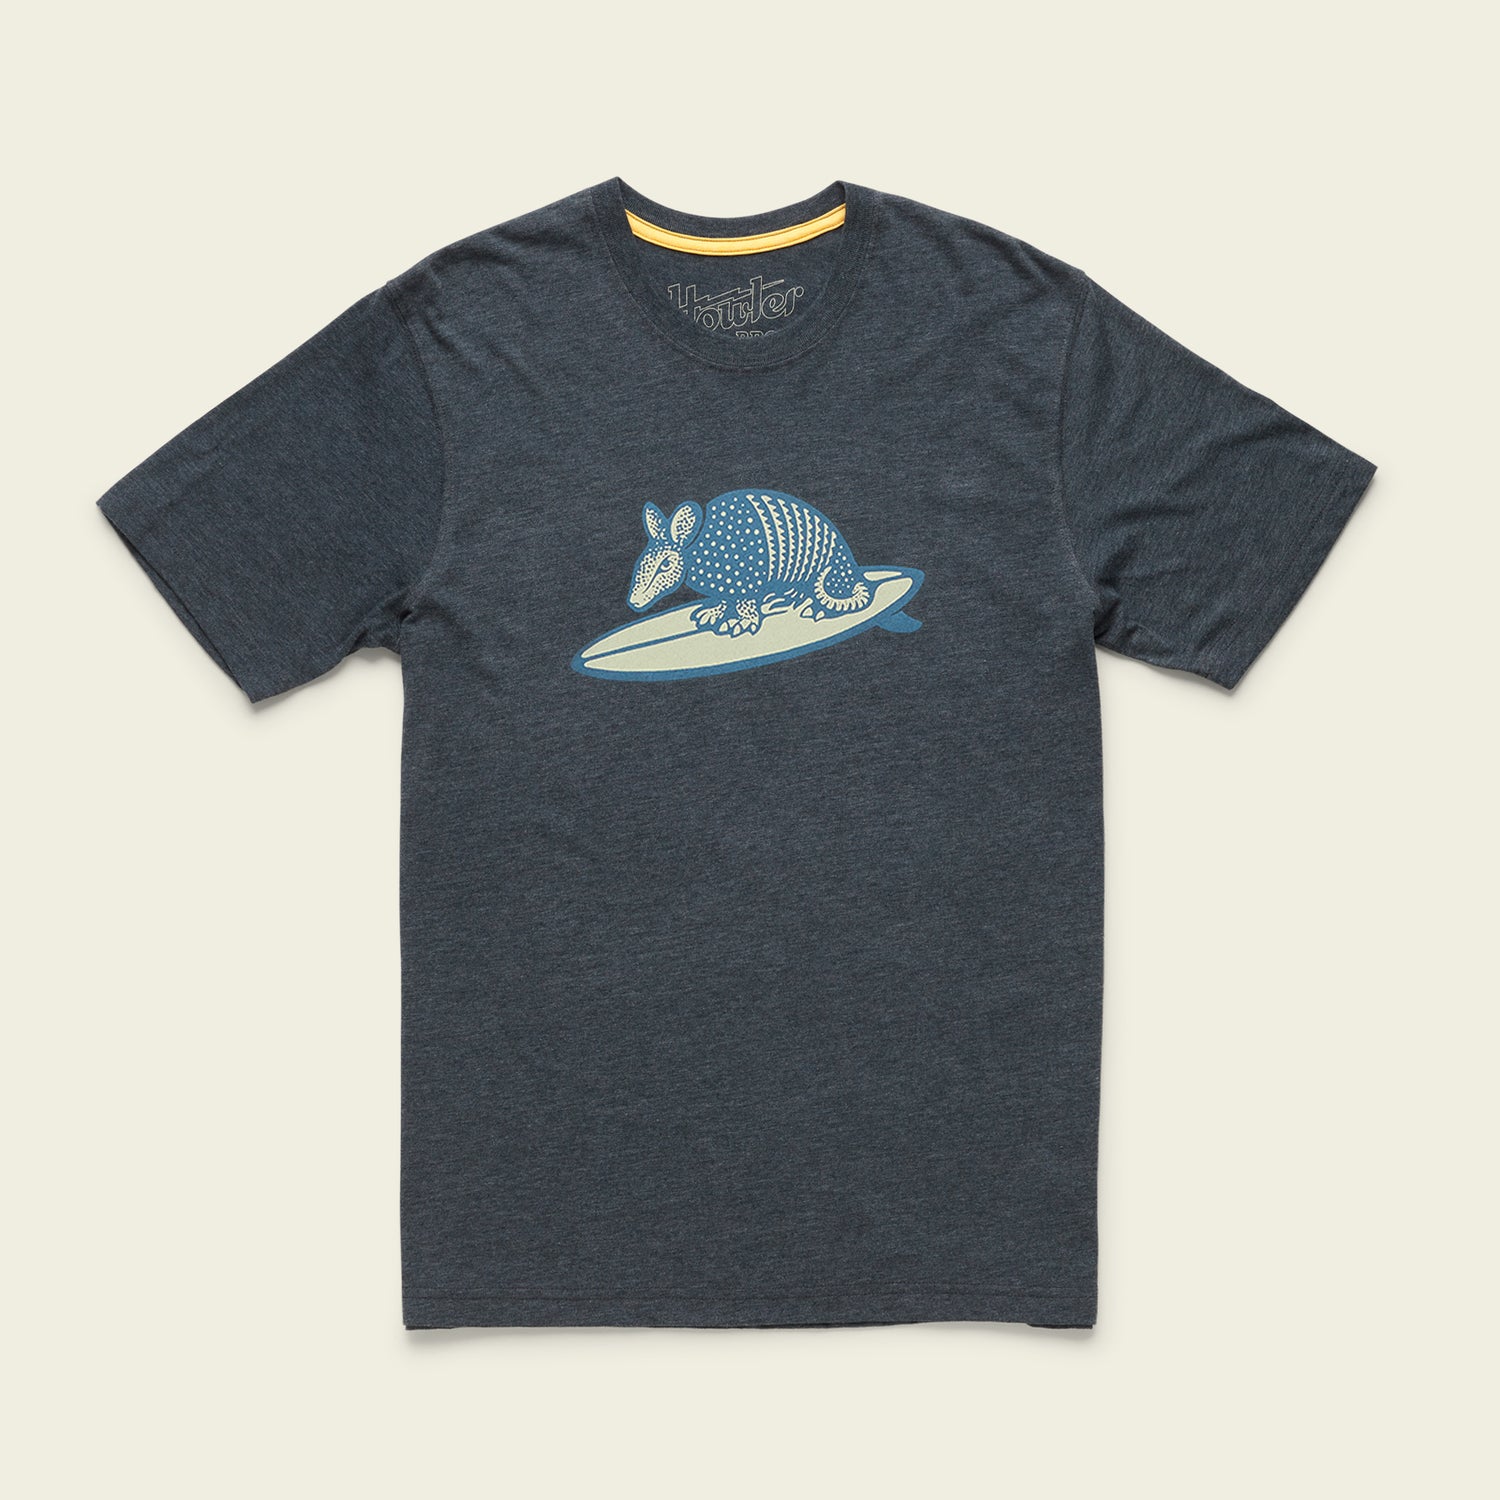 Howler Brothers Surfin' Armadillo T-Shirt - Charcoal Heather XL